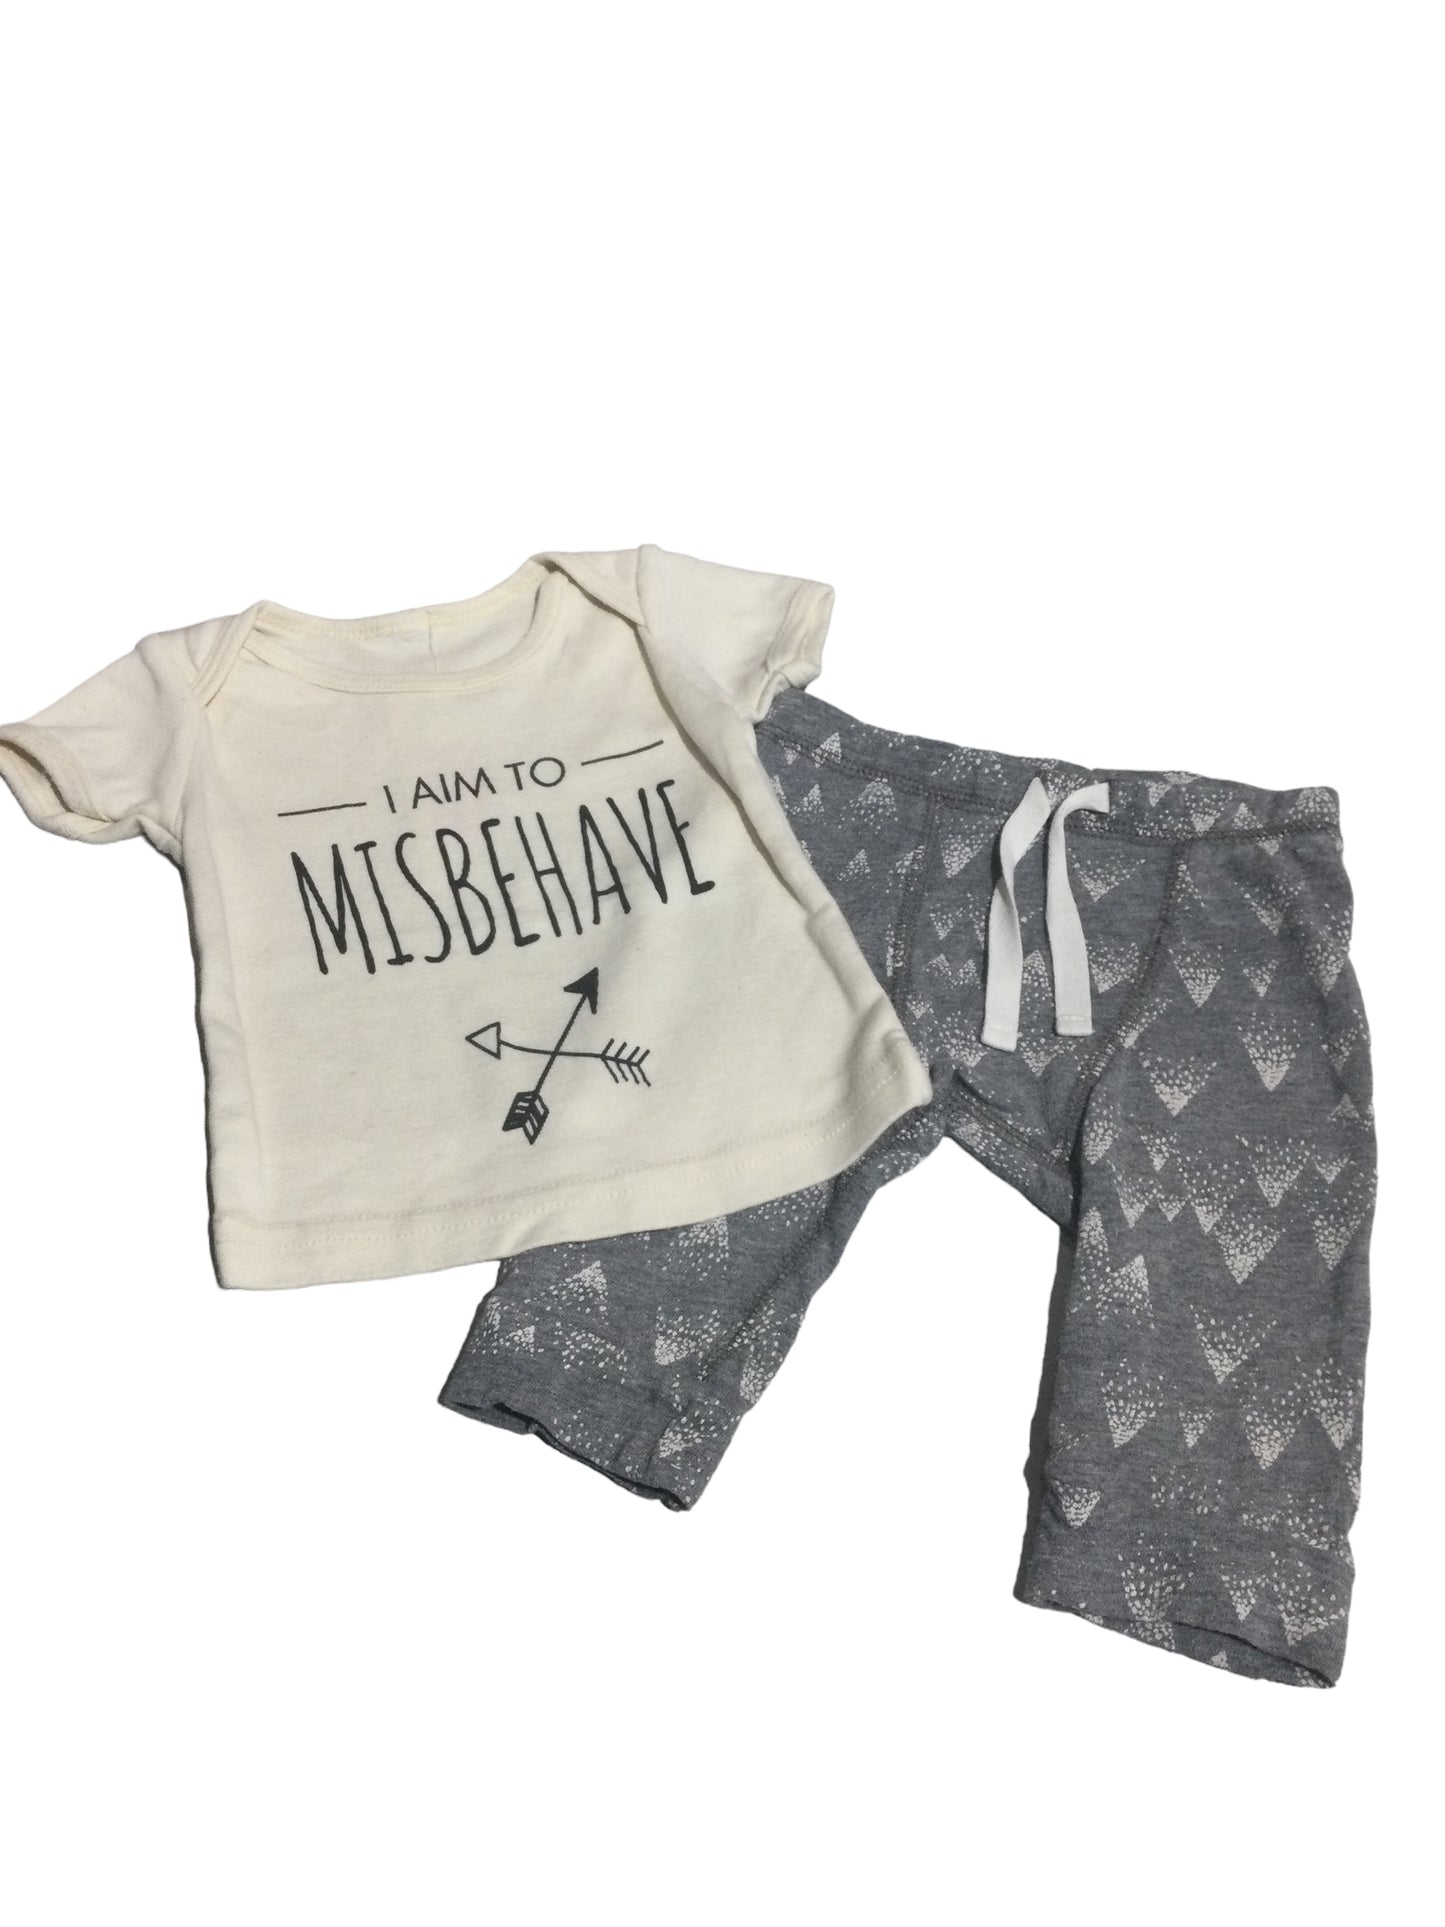 I Aim to Misbehave 2pc Set